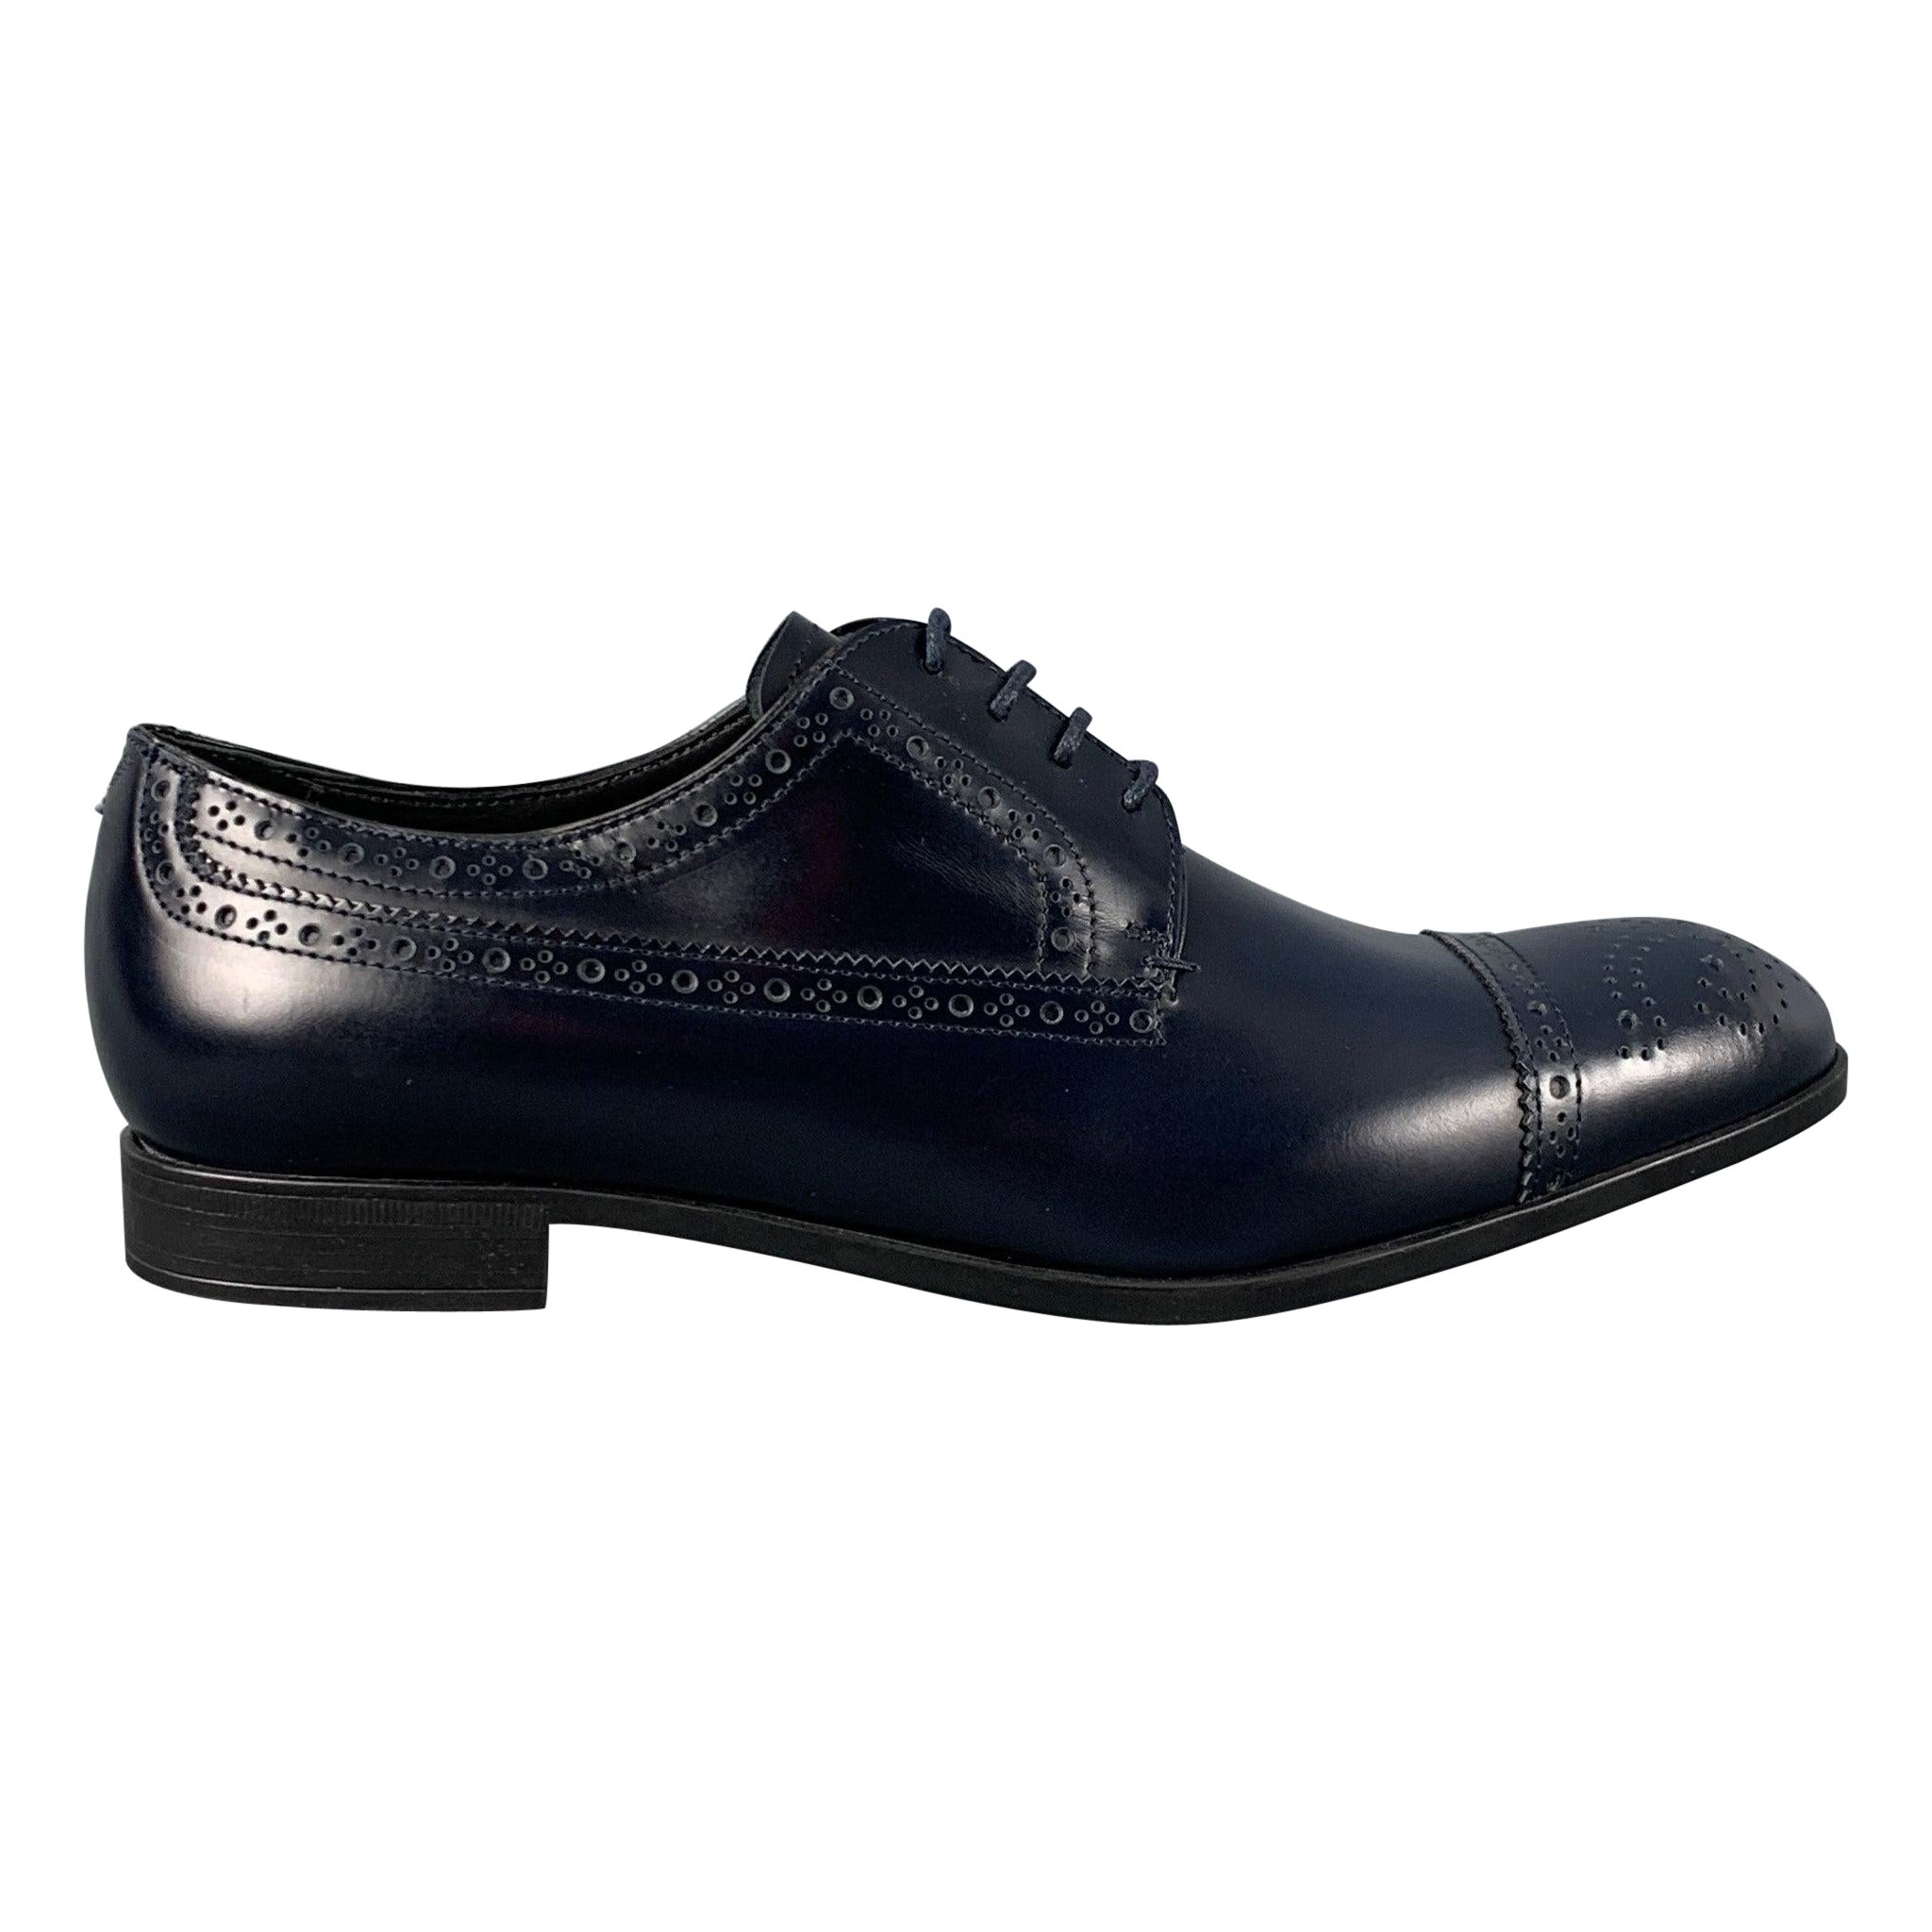 EMPORIO ARMANI Size 9 Navy Perforated Leather Lace Up Shoes For Sale